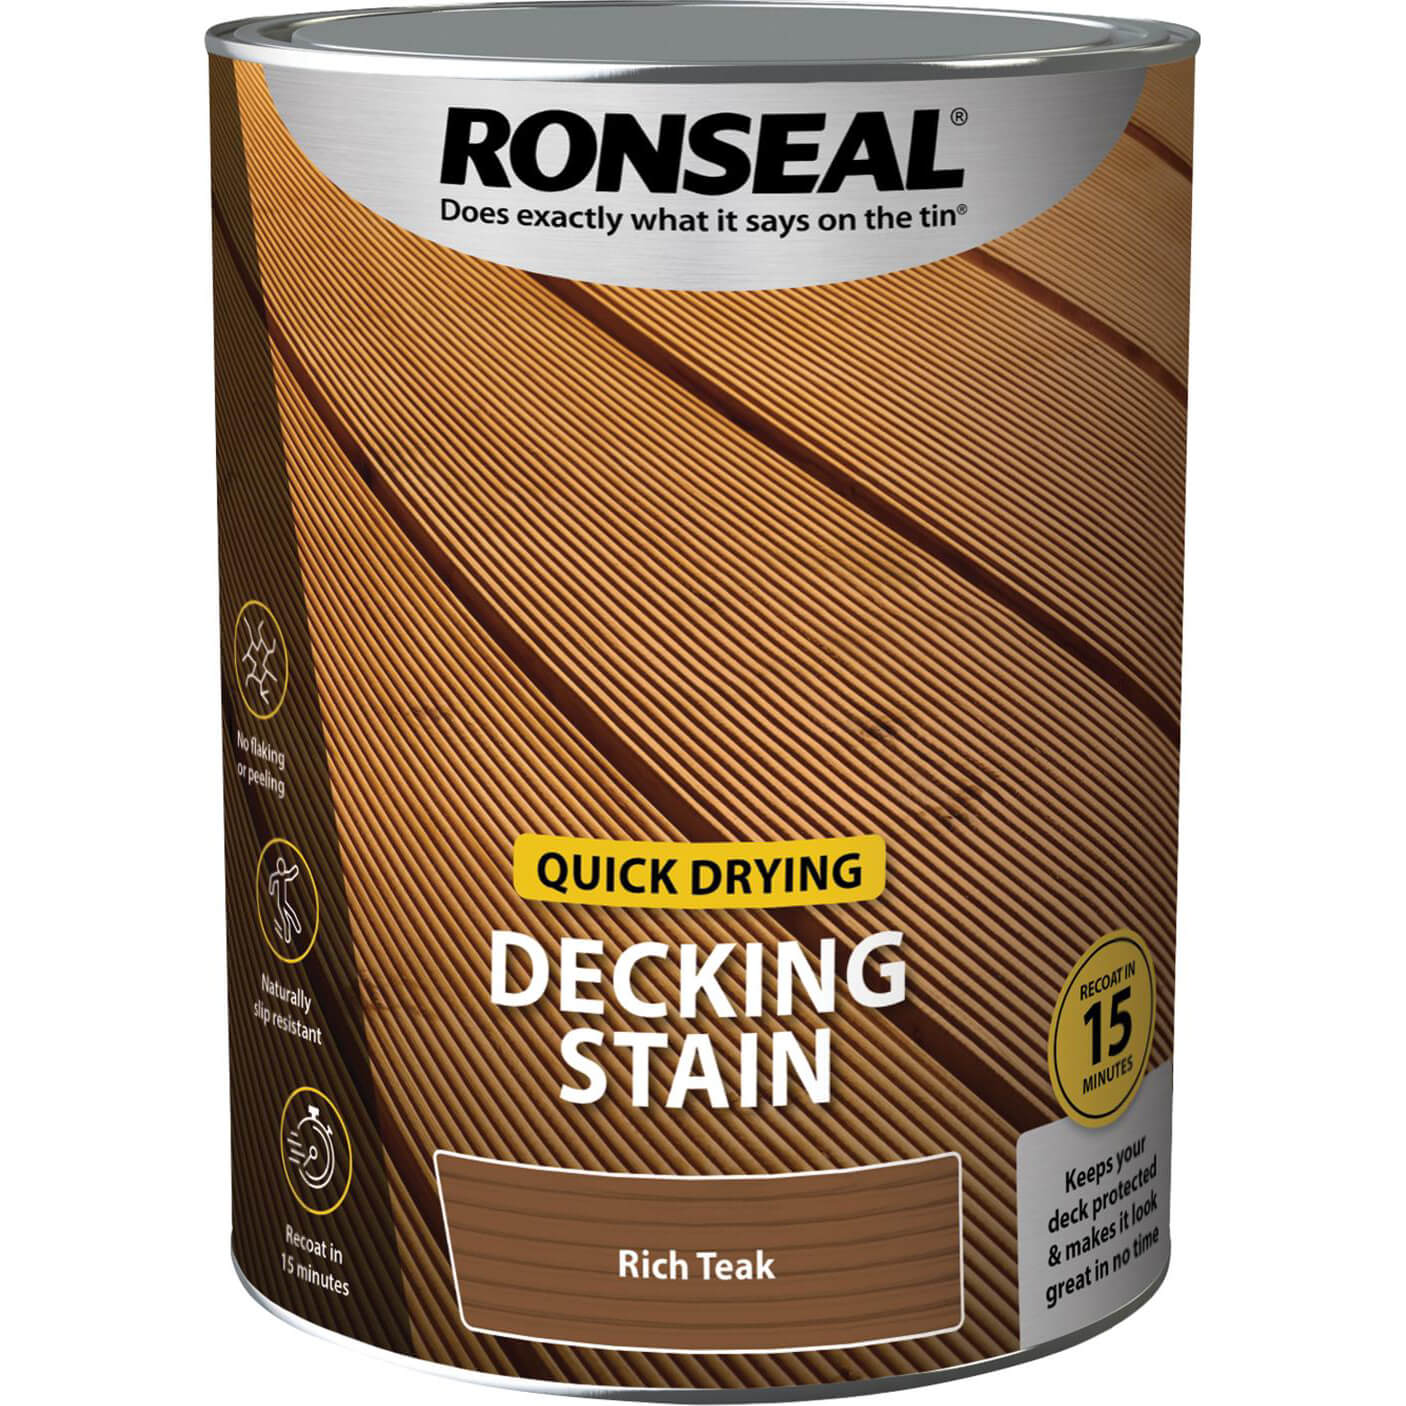 Image of Ronseal Quick Drying Decking Stain 5l Rich Teak